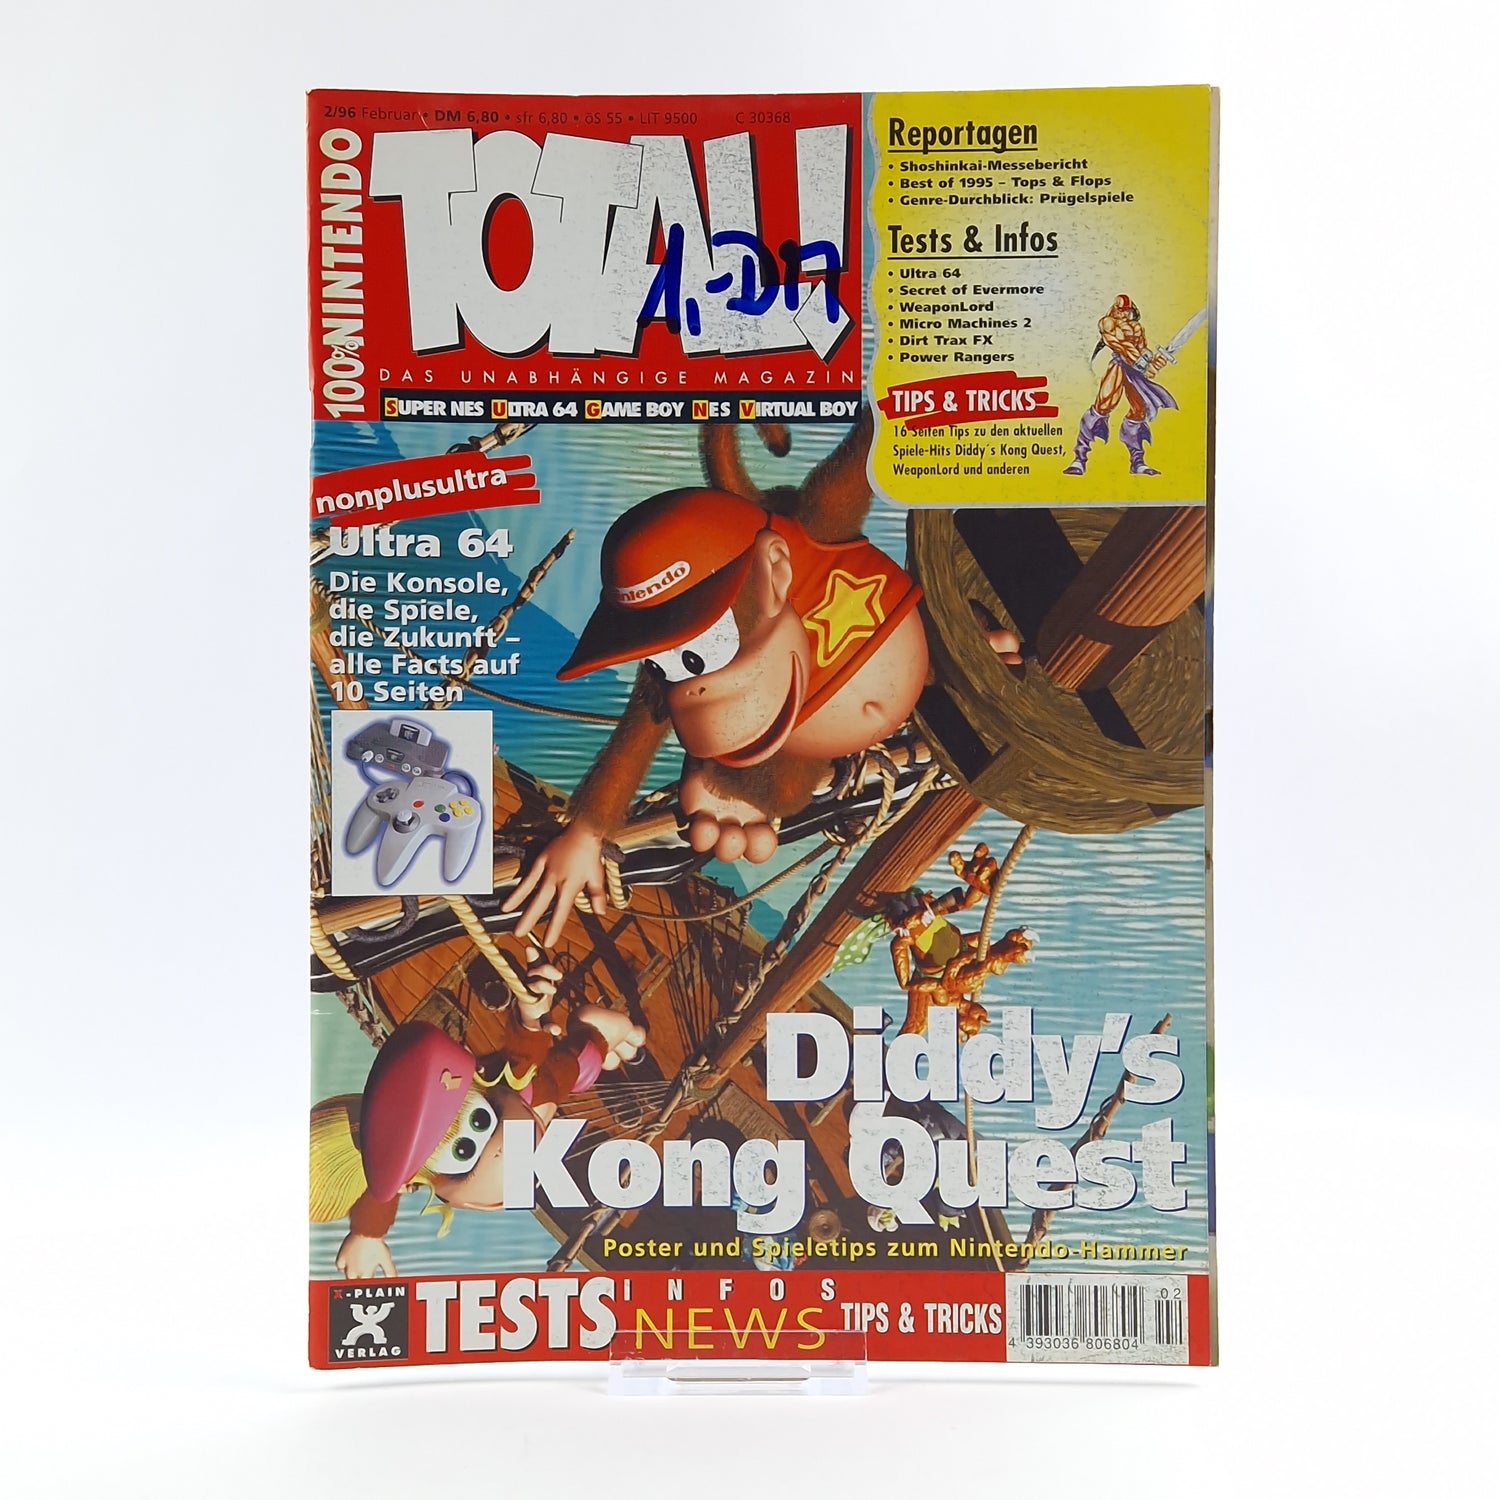 100% Nintendo TOTAL! Magazine: Diddy Kong's Quest Feb. 1996 - total magazine